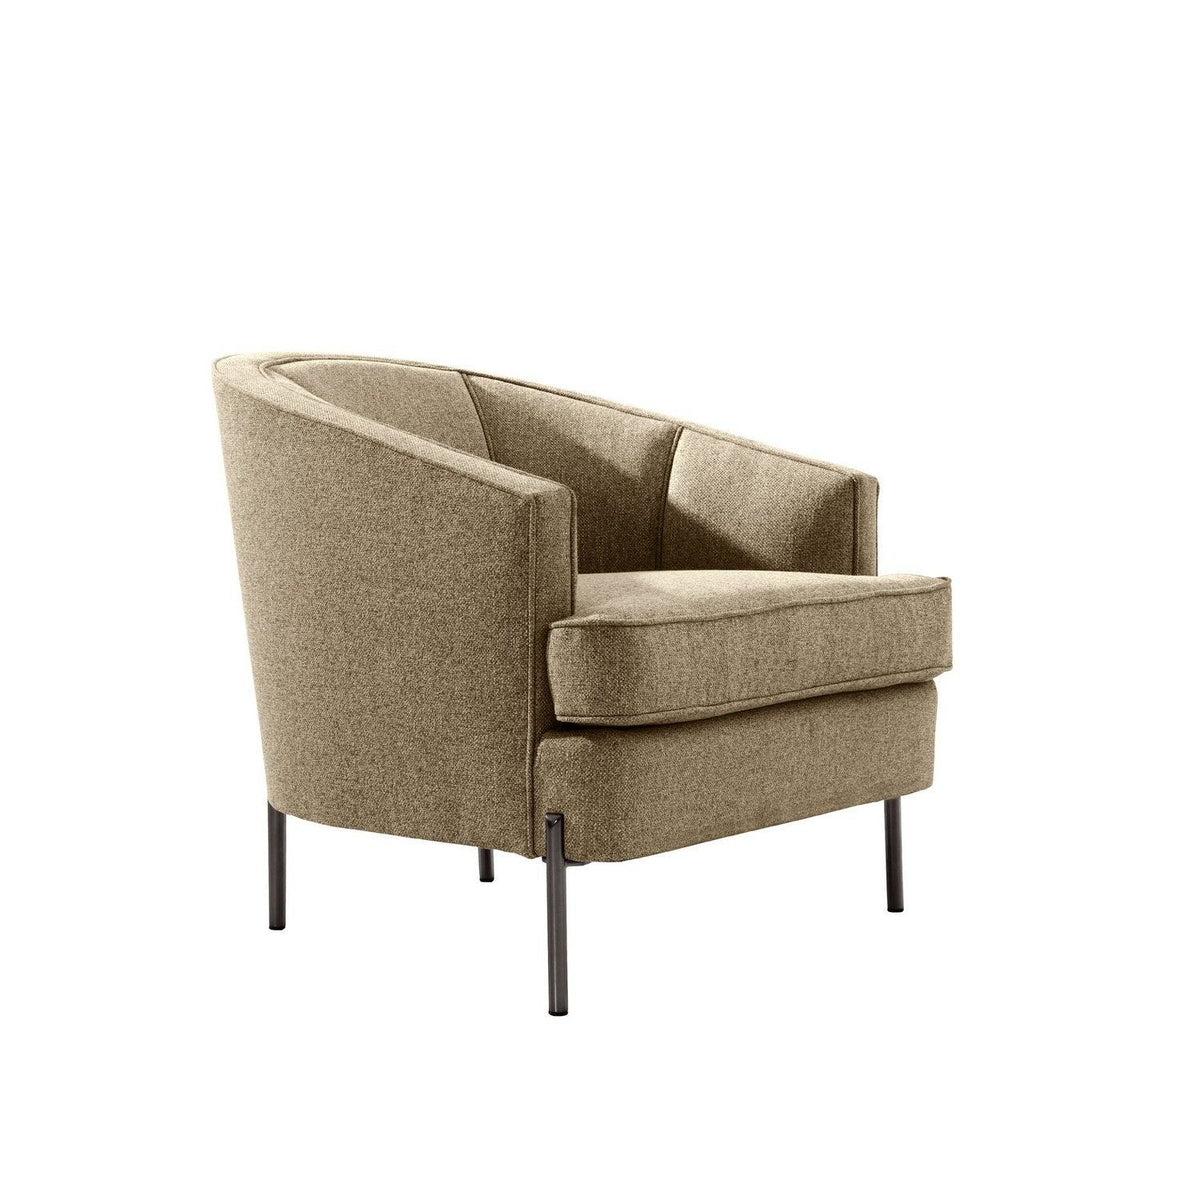 Iconic Home Astoria Linen Textured Club Chair 